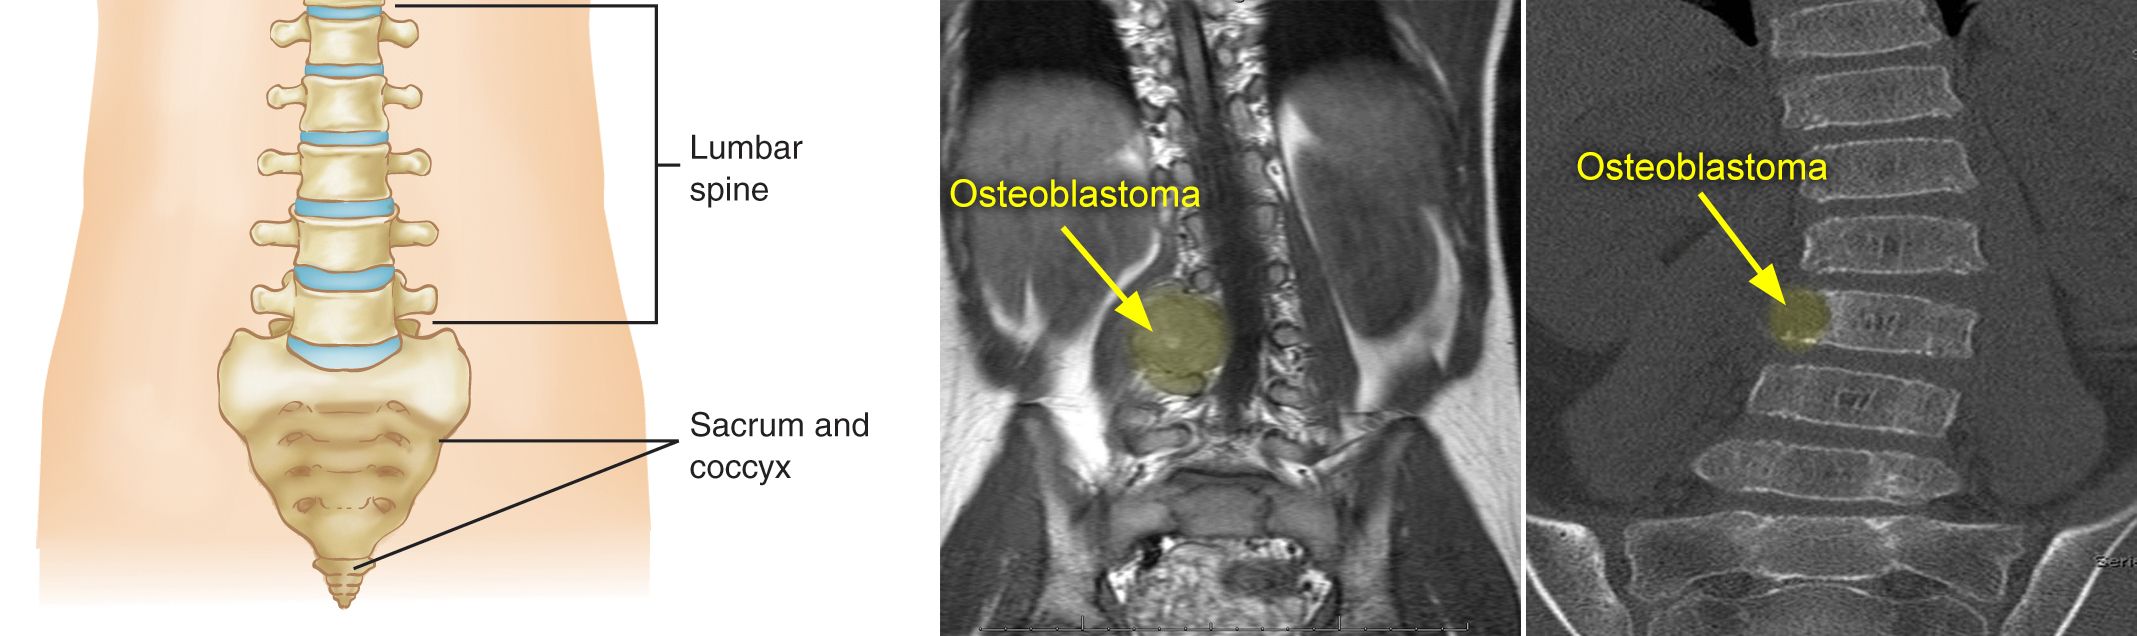 osteoblastoma that caused spinal curve